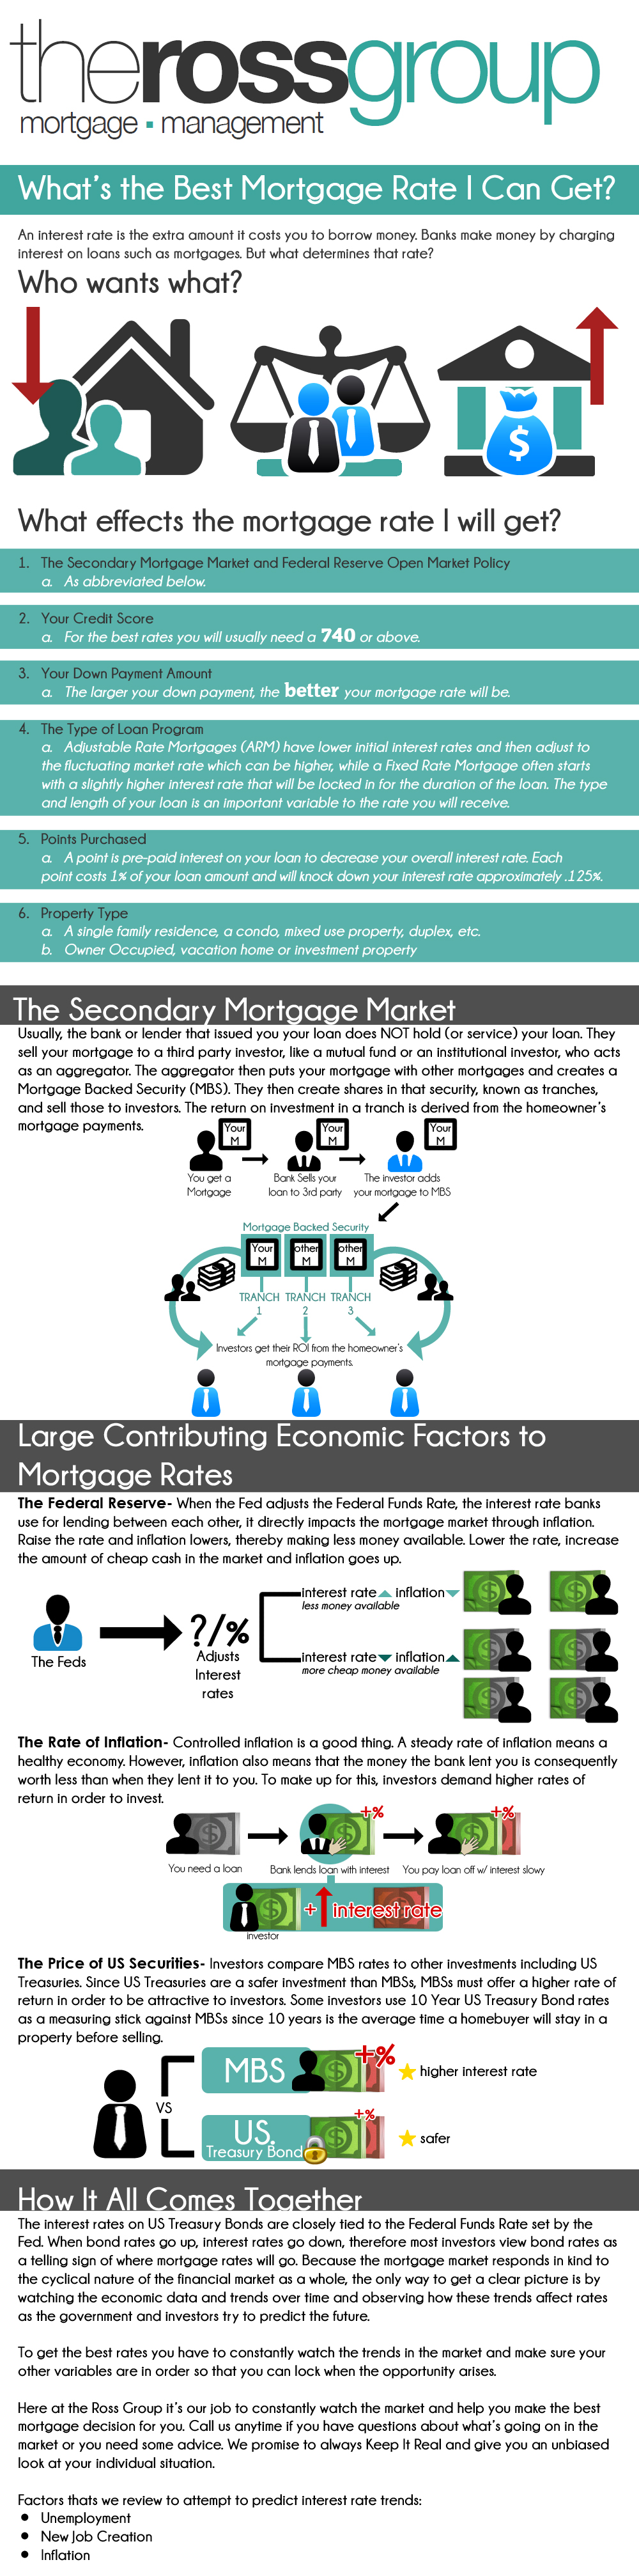 Mortgage Rates Infographic